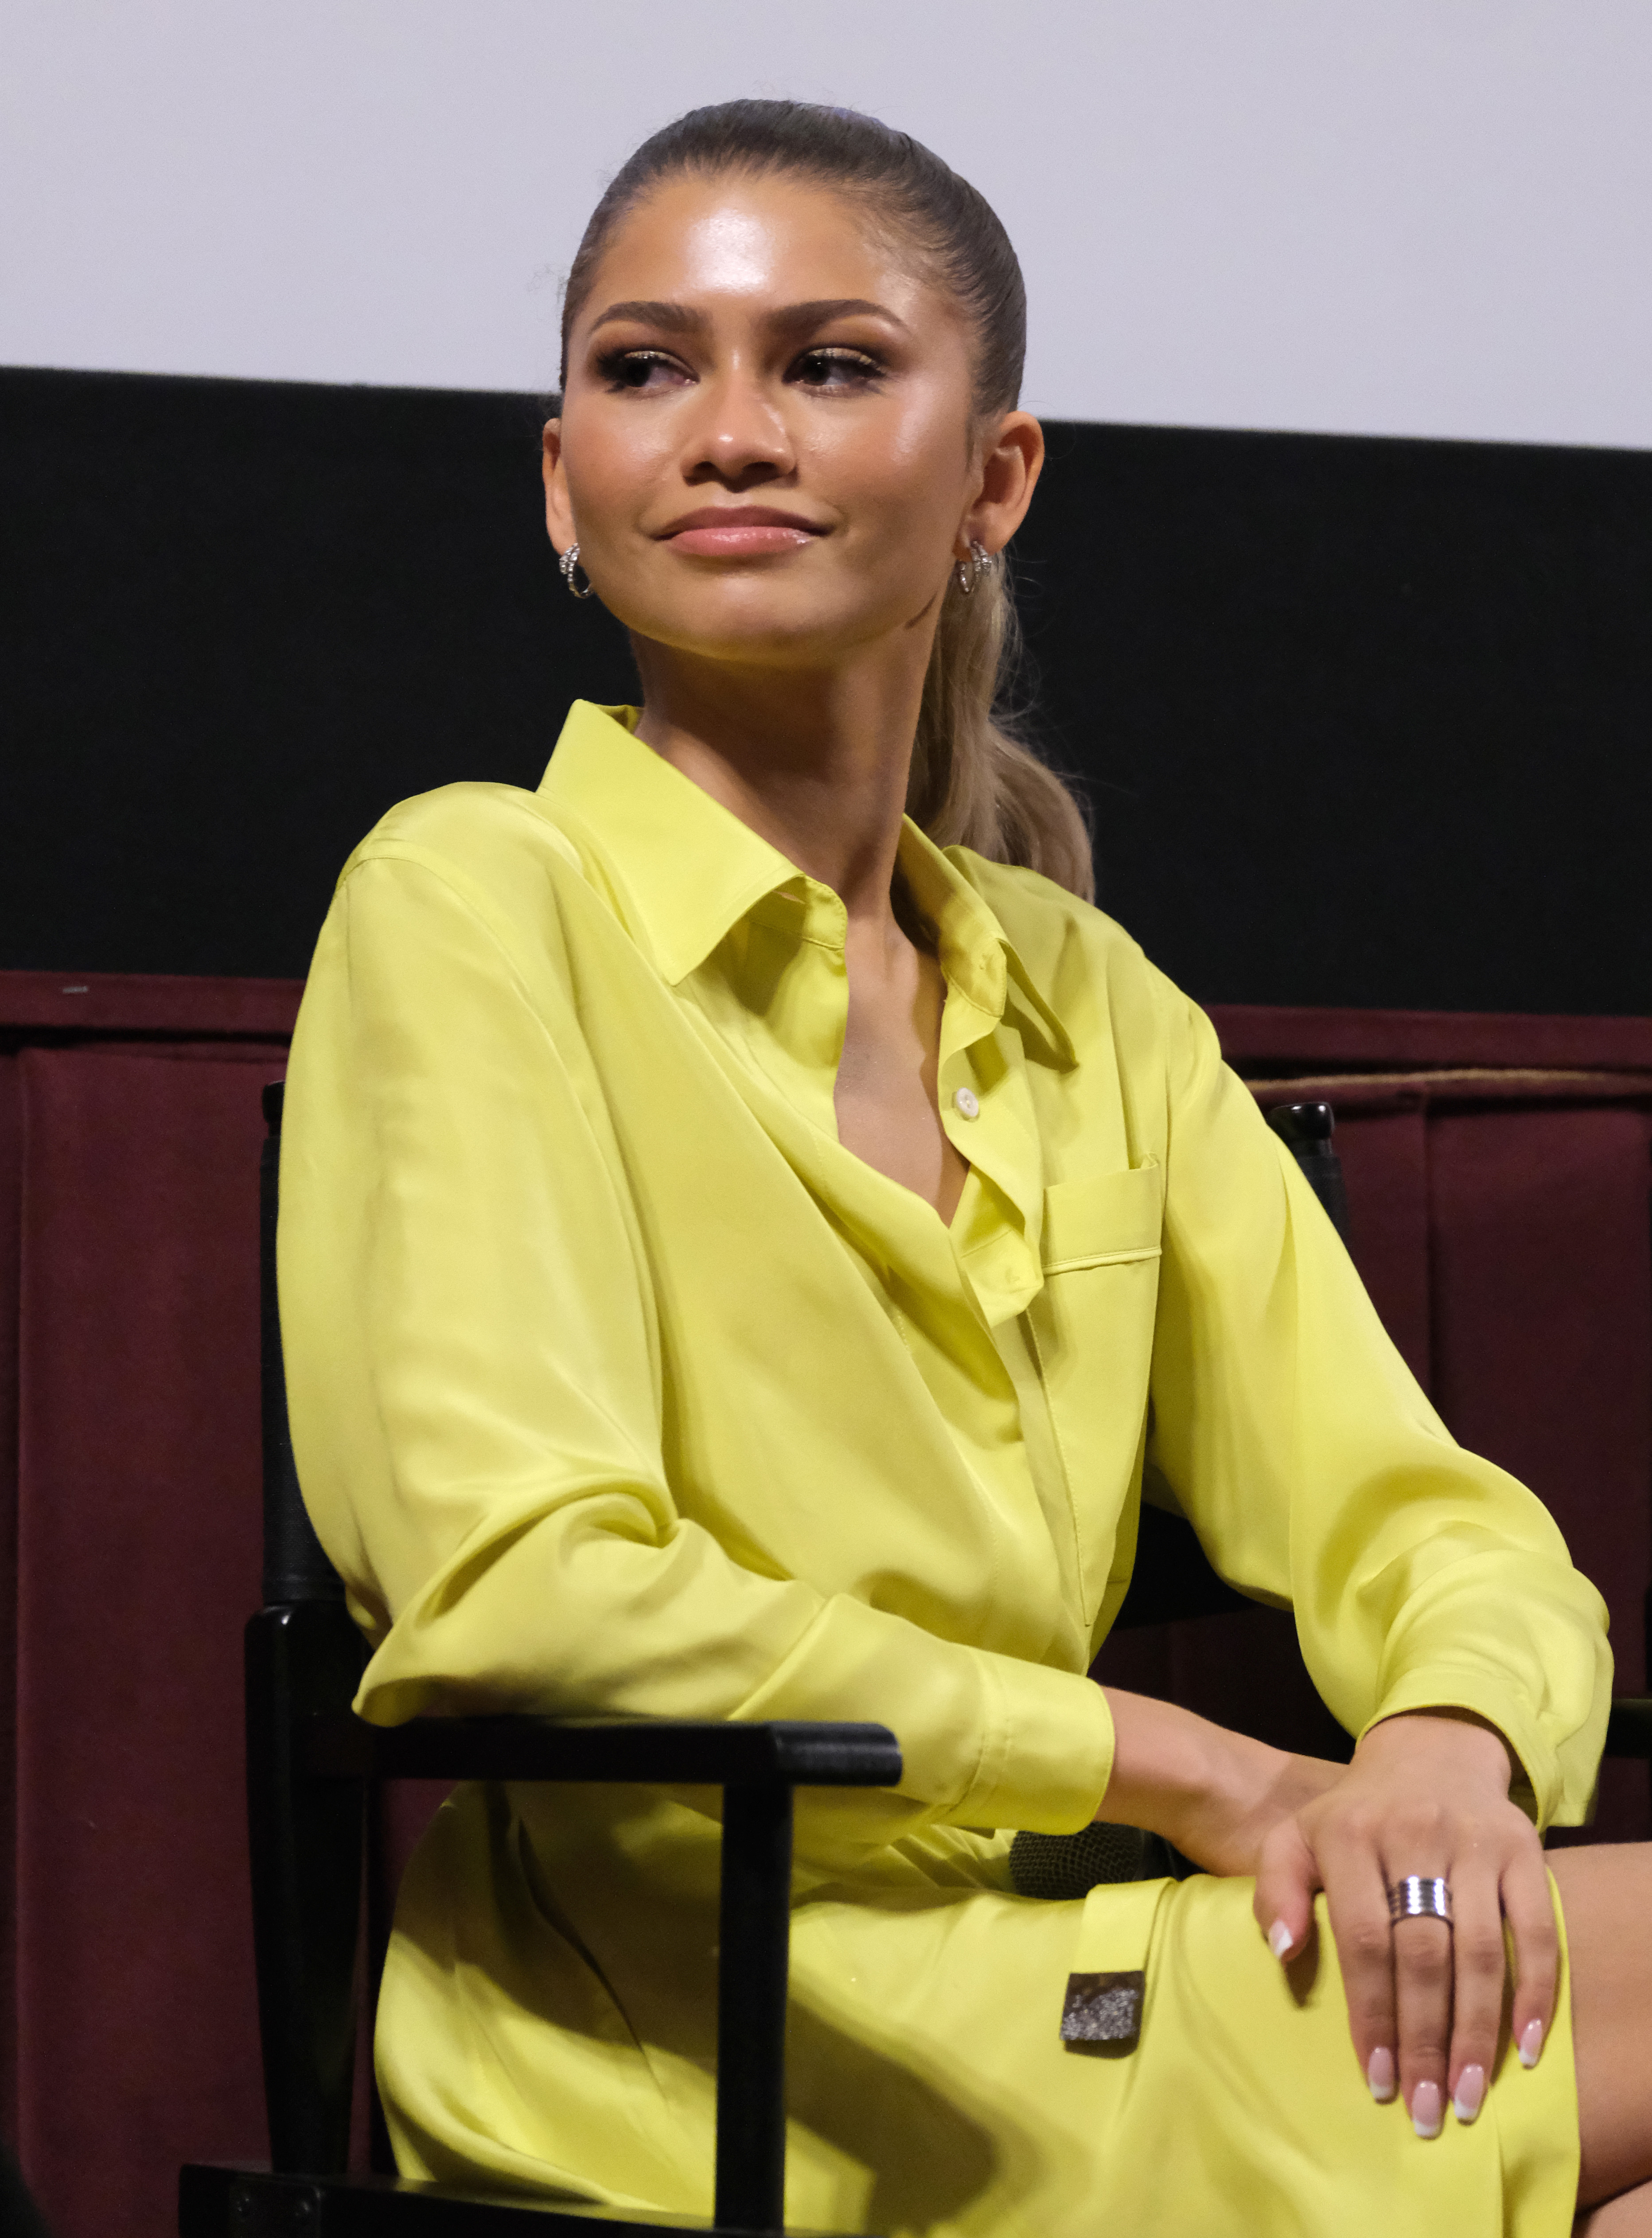 Zendaya in a bright yellow suit sits on a panel, looking to the side, with a slight smile